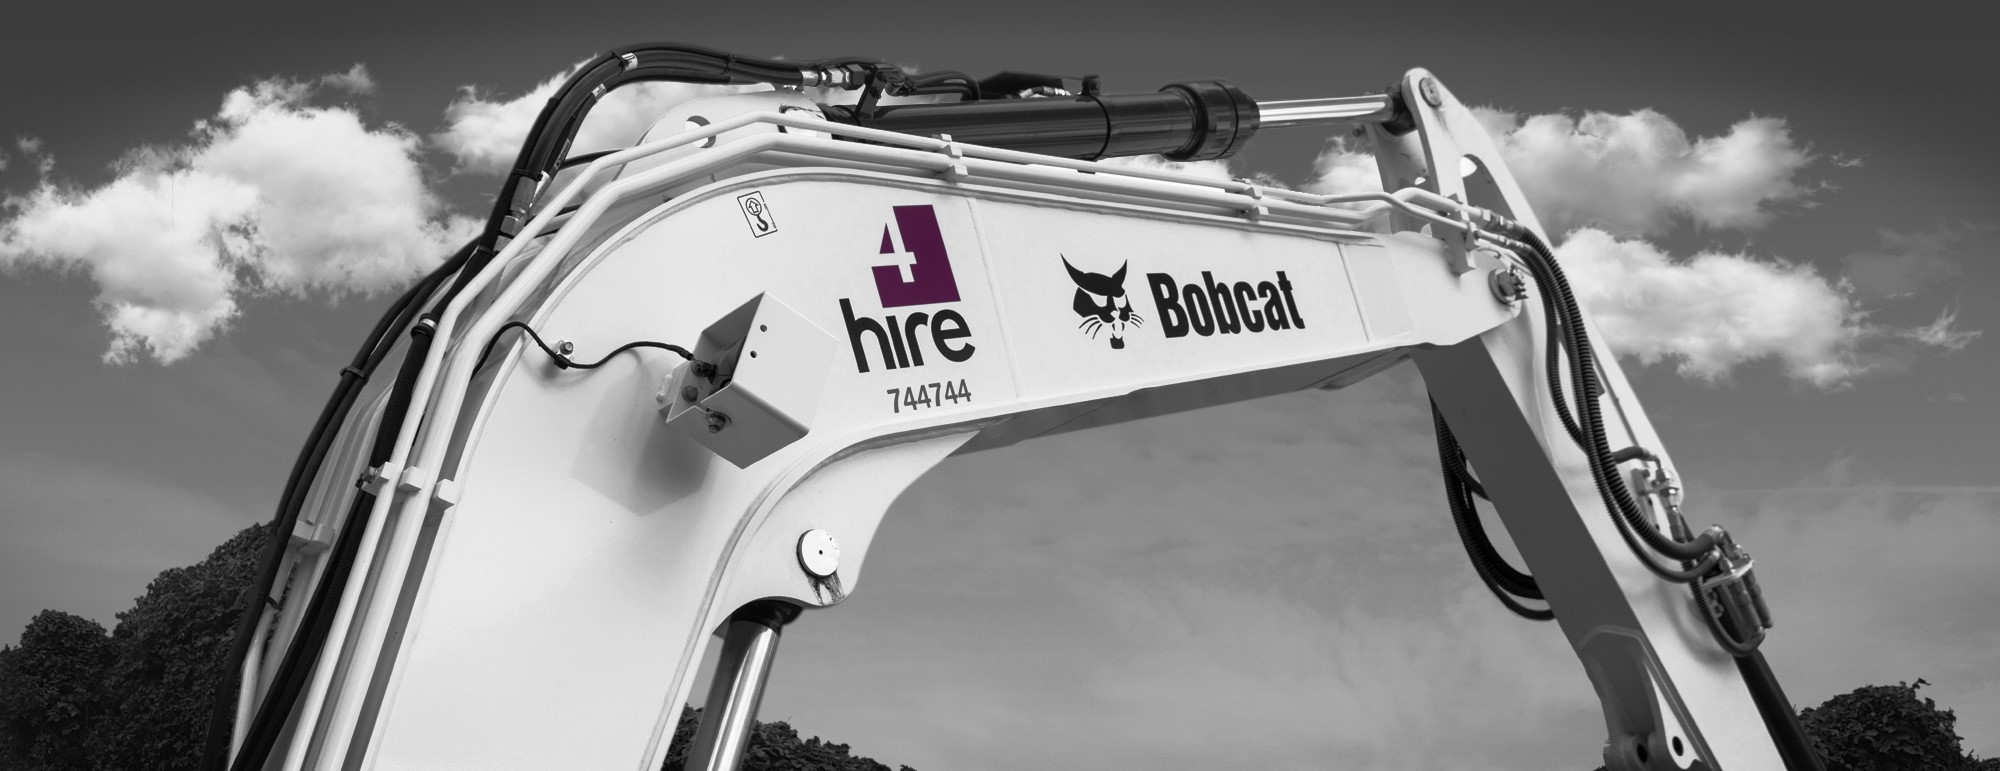 A guide to hiring tools, plant, machinery and vehicles in the Channel Islands Image